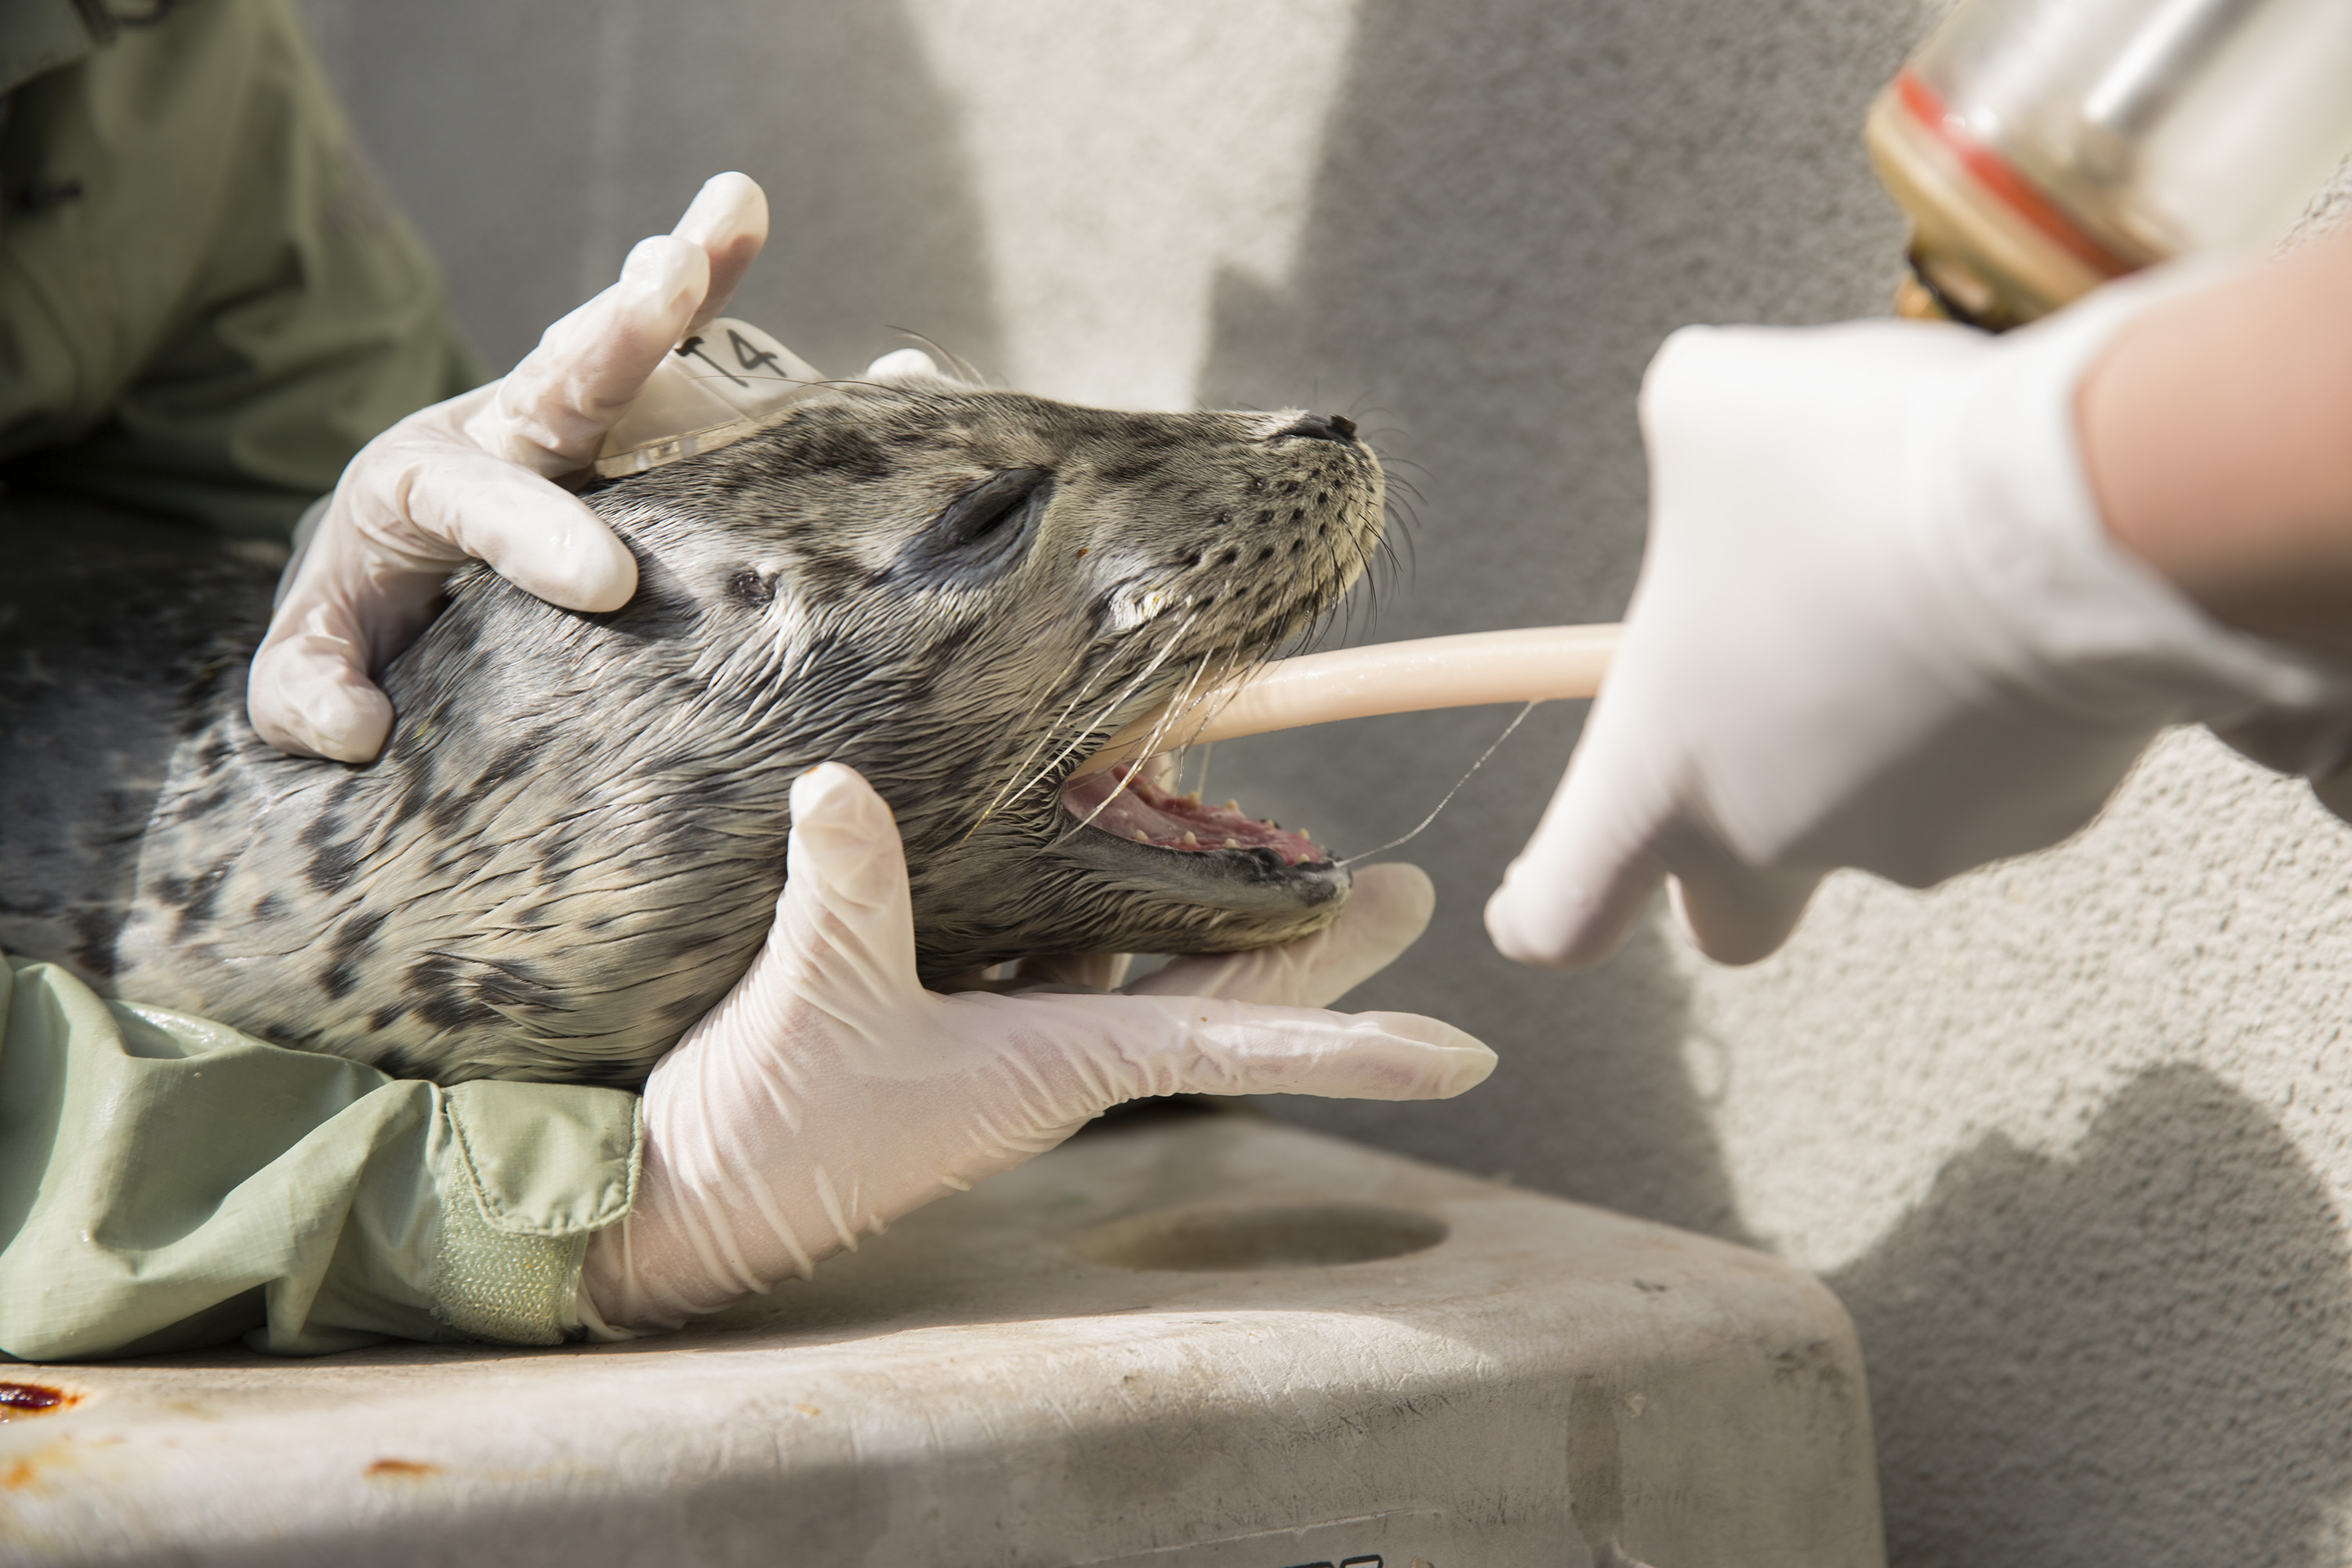 Volunteers tube-feed a malnourished harbor seal pup at the Marine Mammal Center in Marin County, Calif. on May 9, 2014.